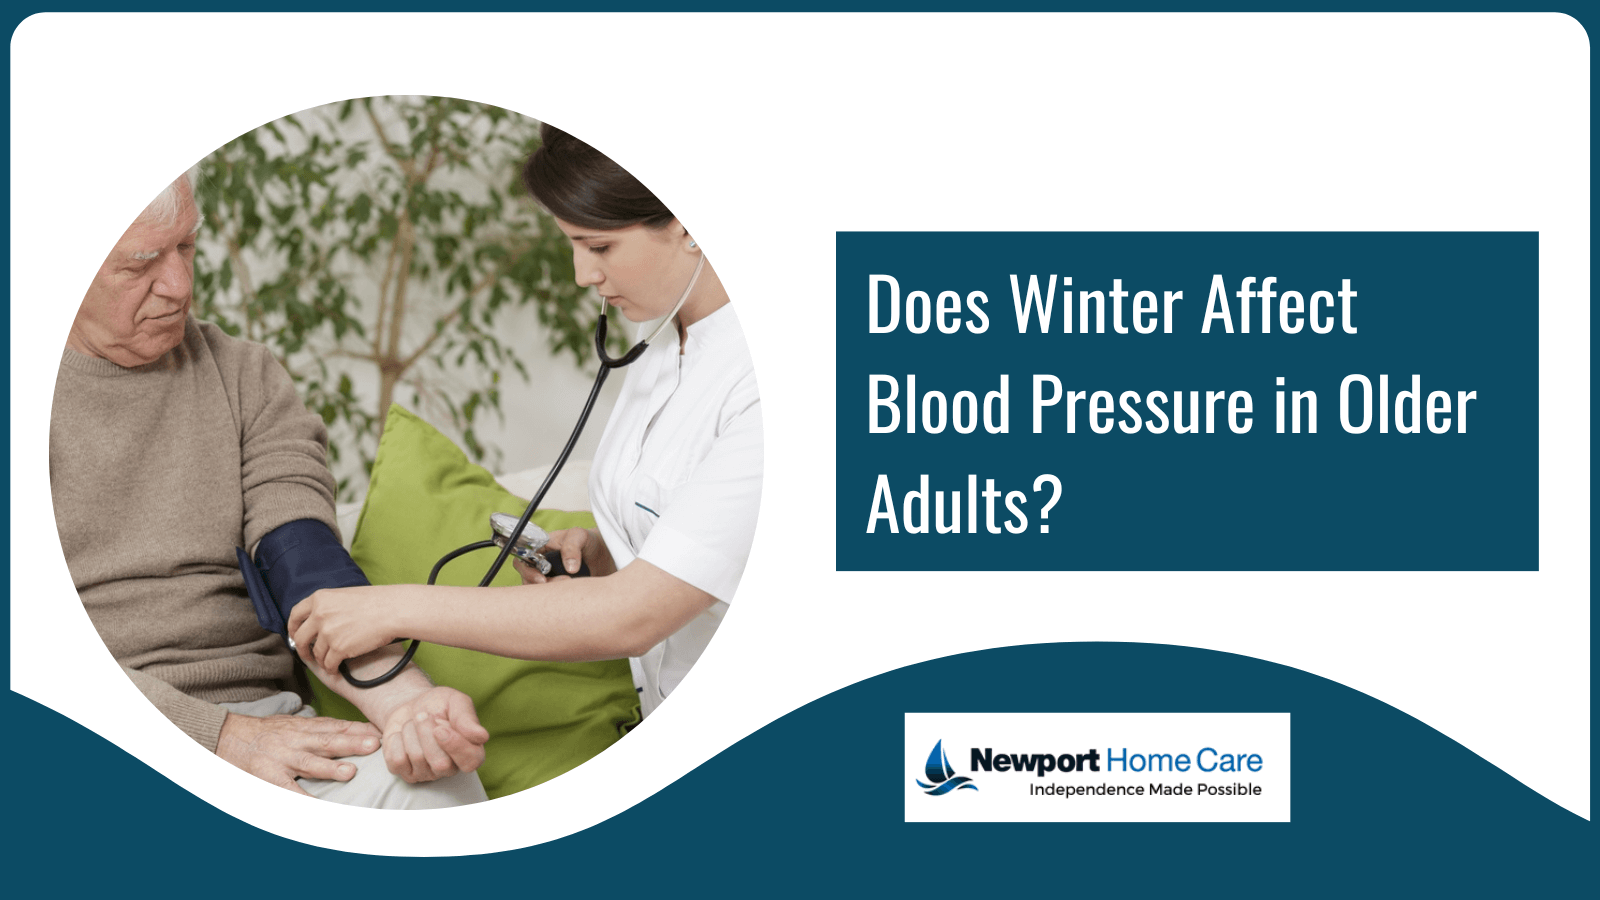 Does Winter Affect Blood Pressure in Older Adults?